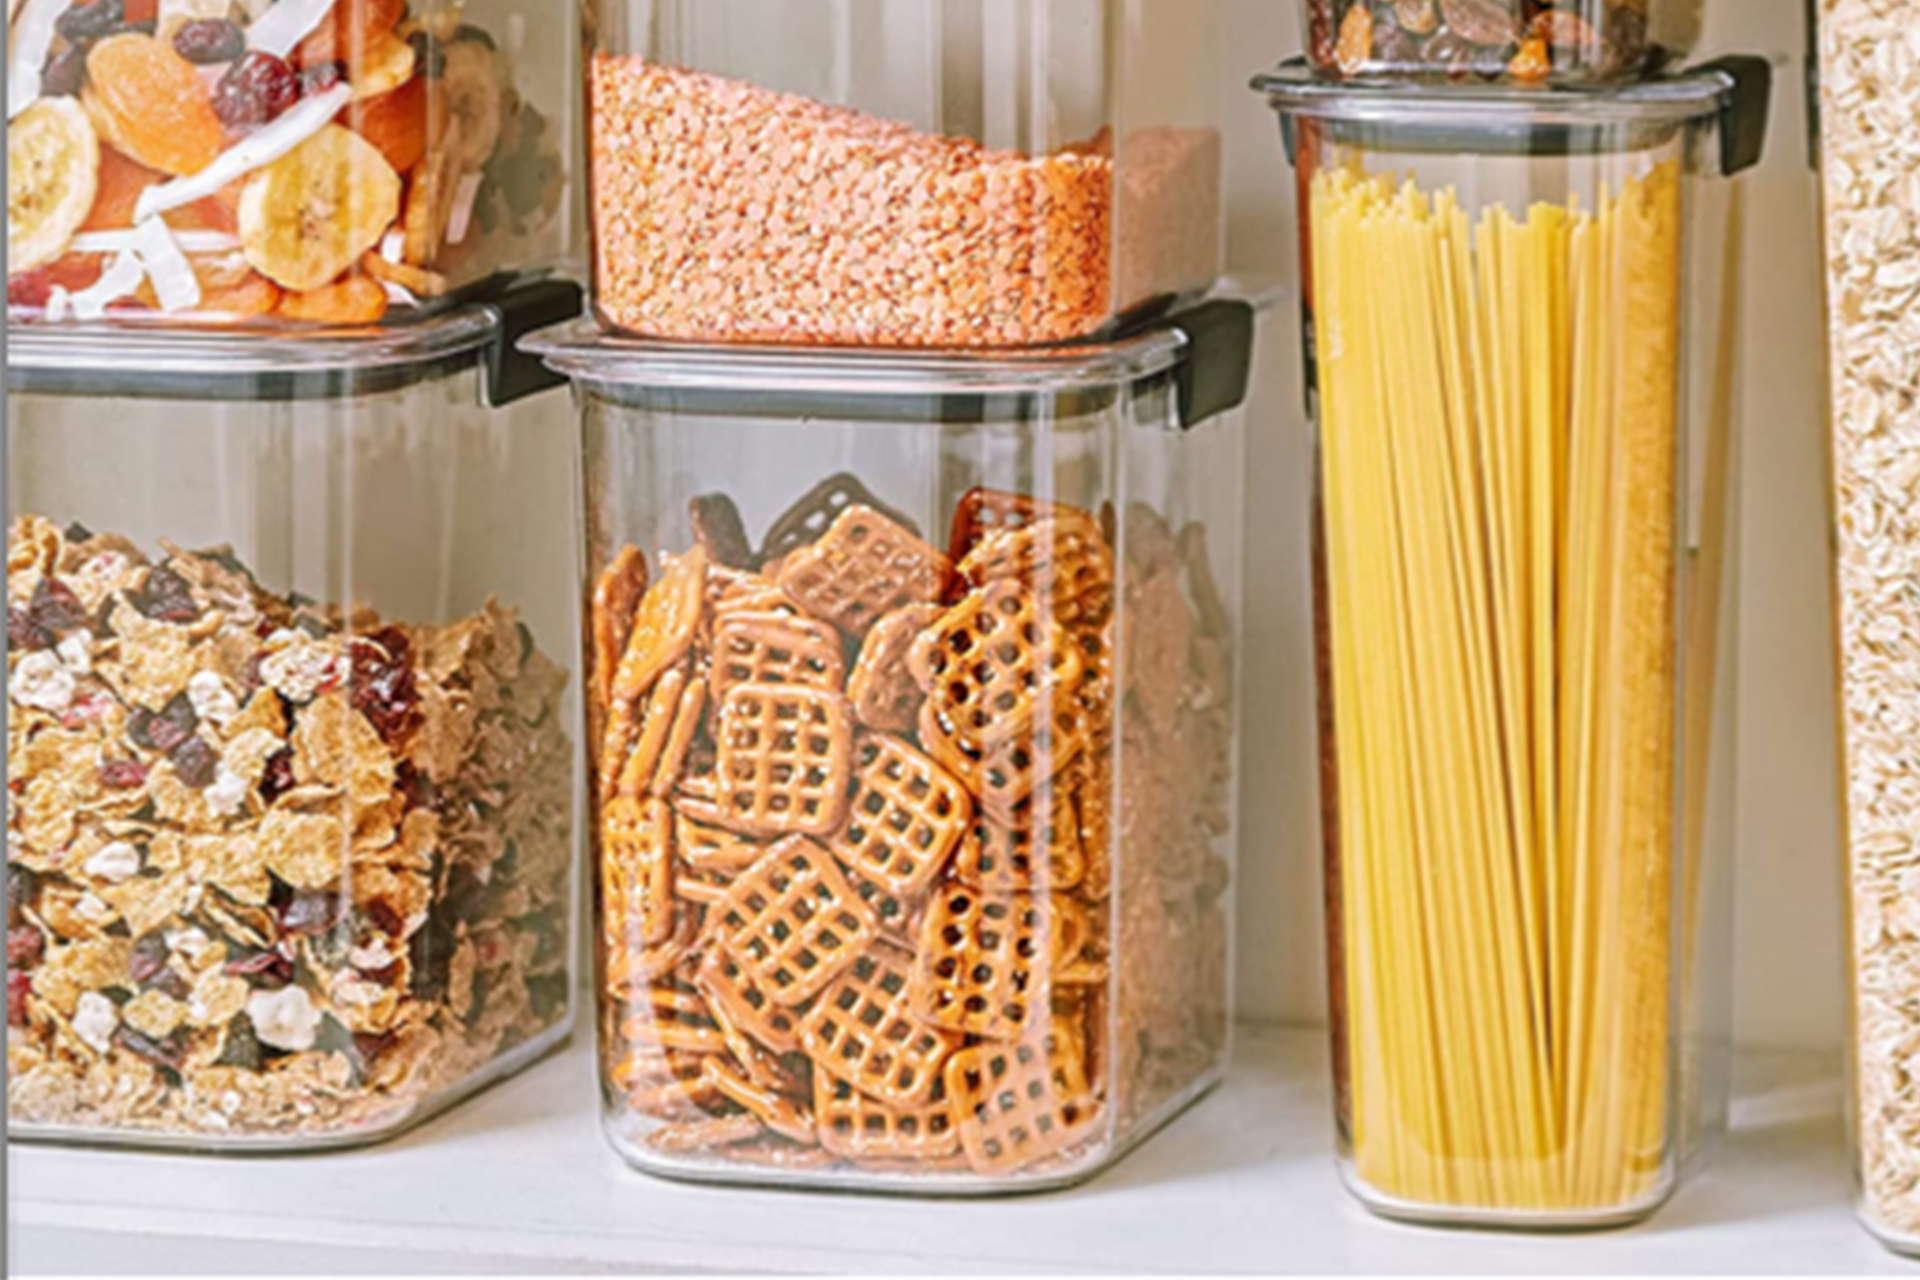 72 Rubbermaid Brilliance ideas  rubbermaid, food storage containers, food  storage